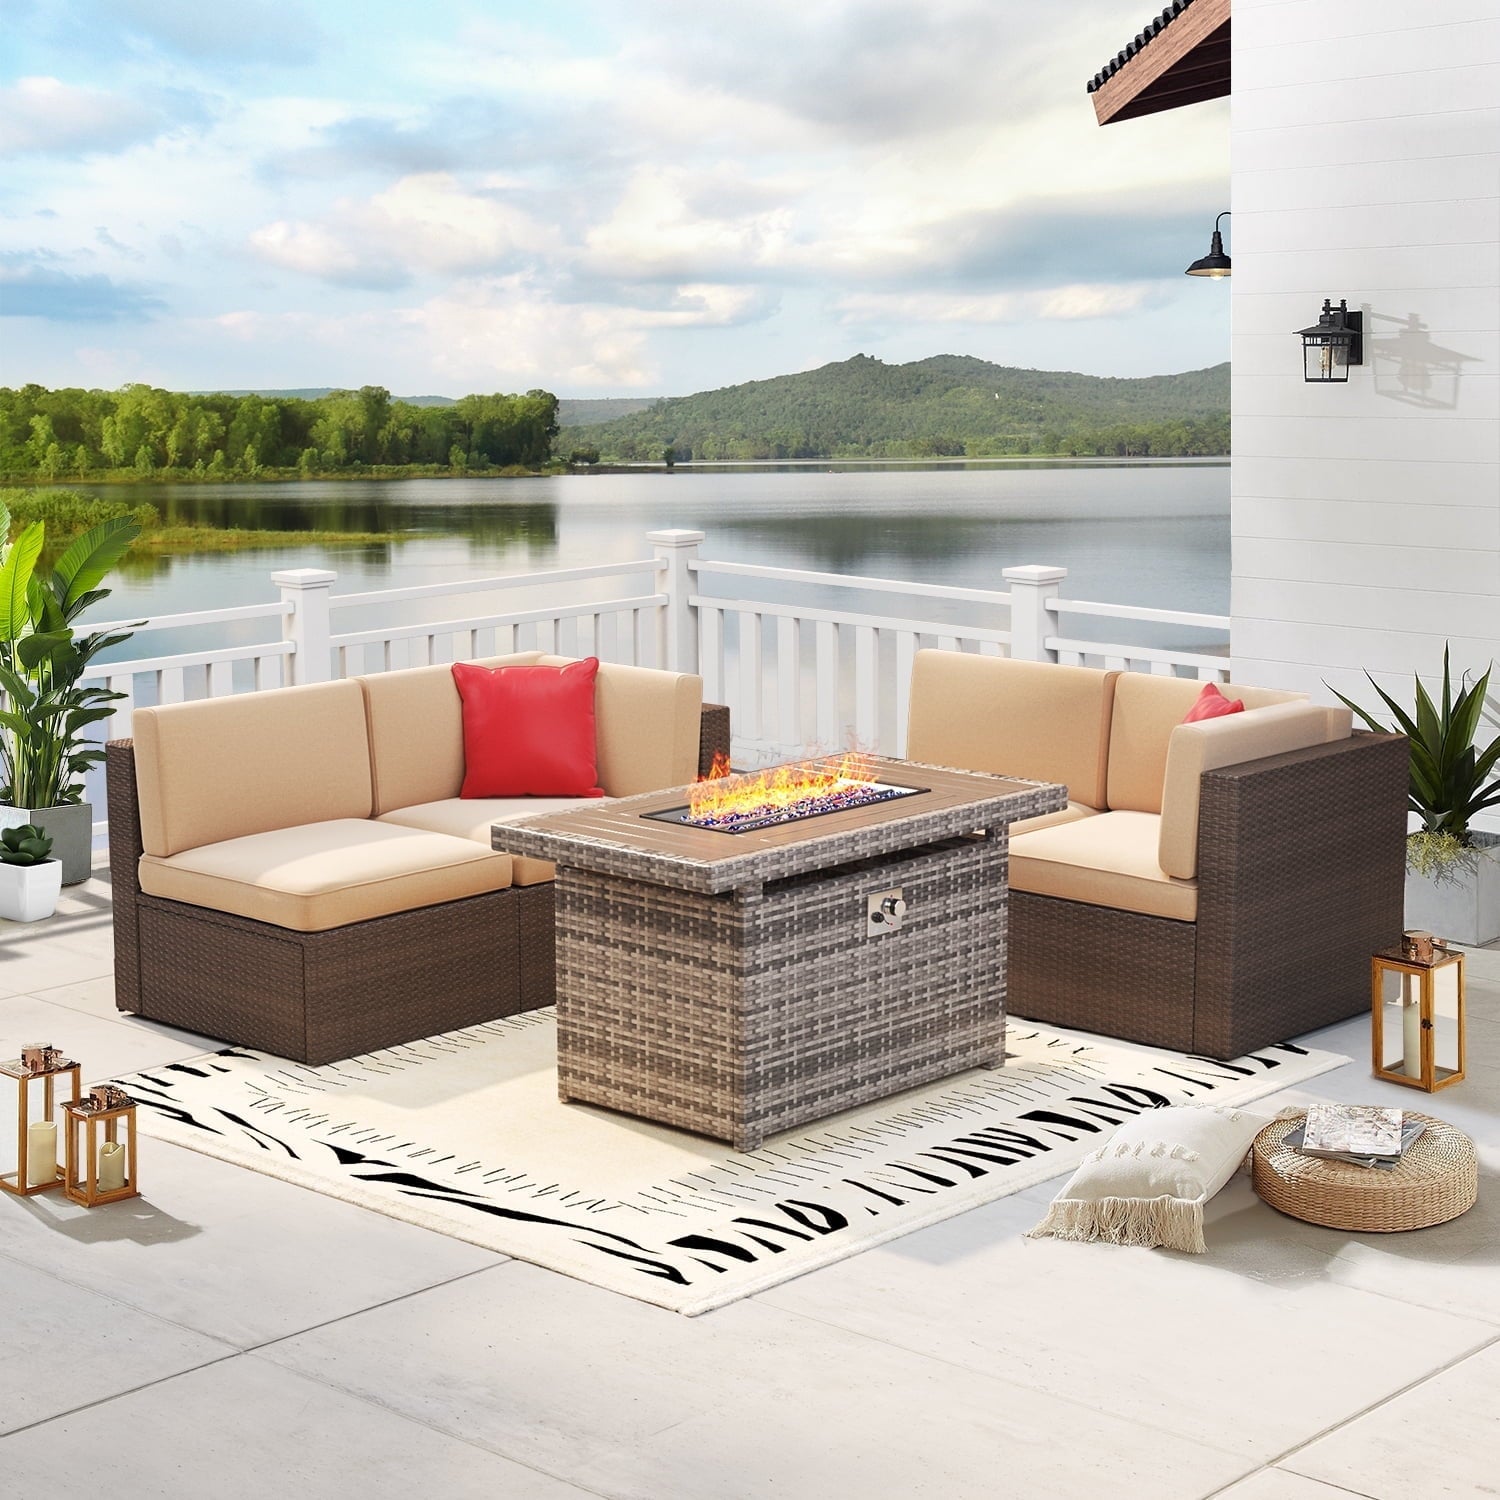 5 Piece Outdoor Patio Conversation Set with 44-inch Fire Pit Table,Outdoor Furniture Sectional Wicker Sofa Set with Beige Cushions